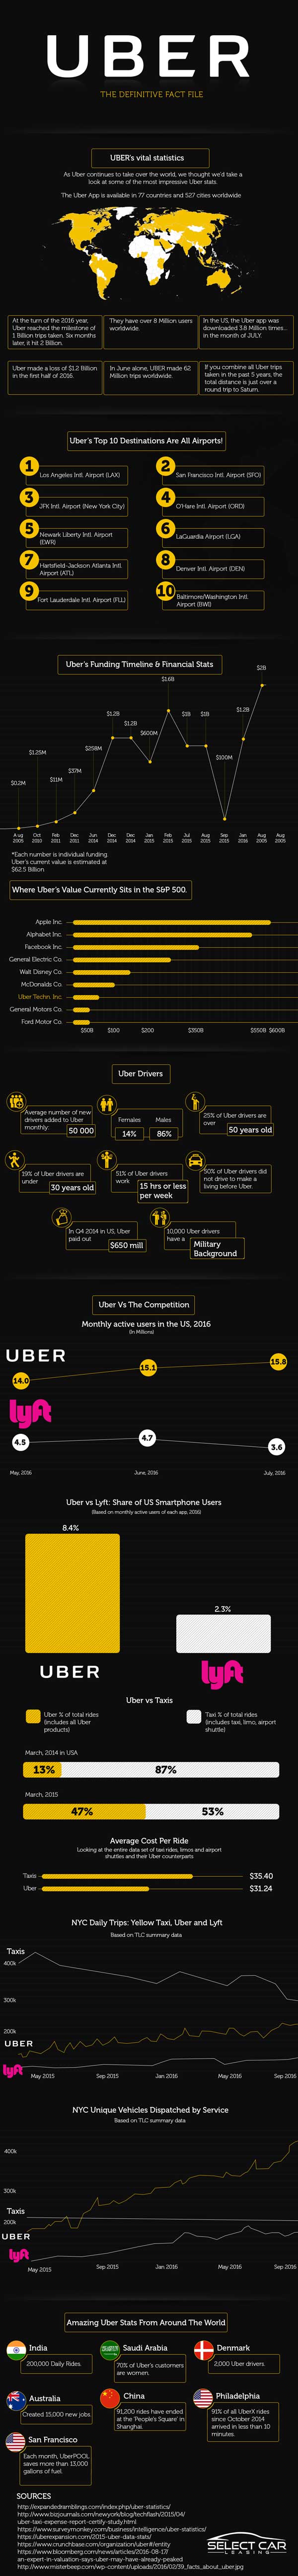 Uber: The Definitive Fact File